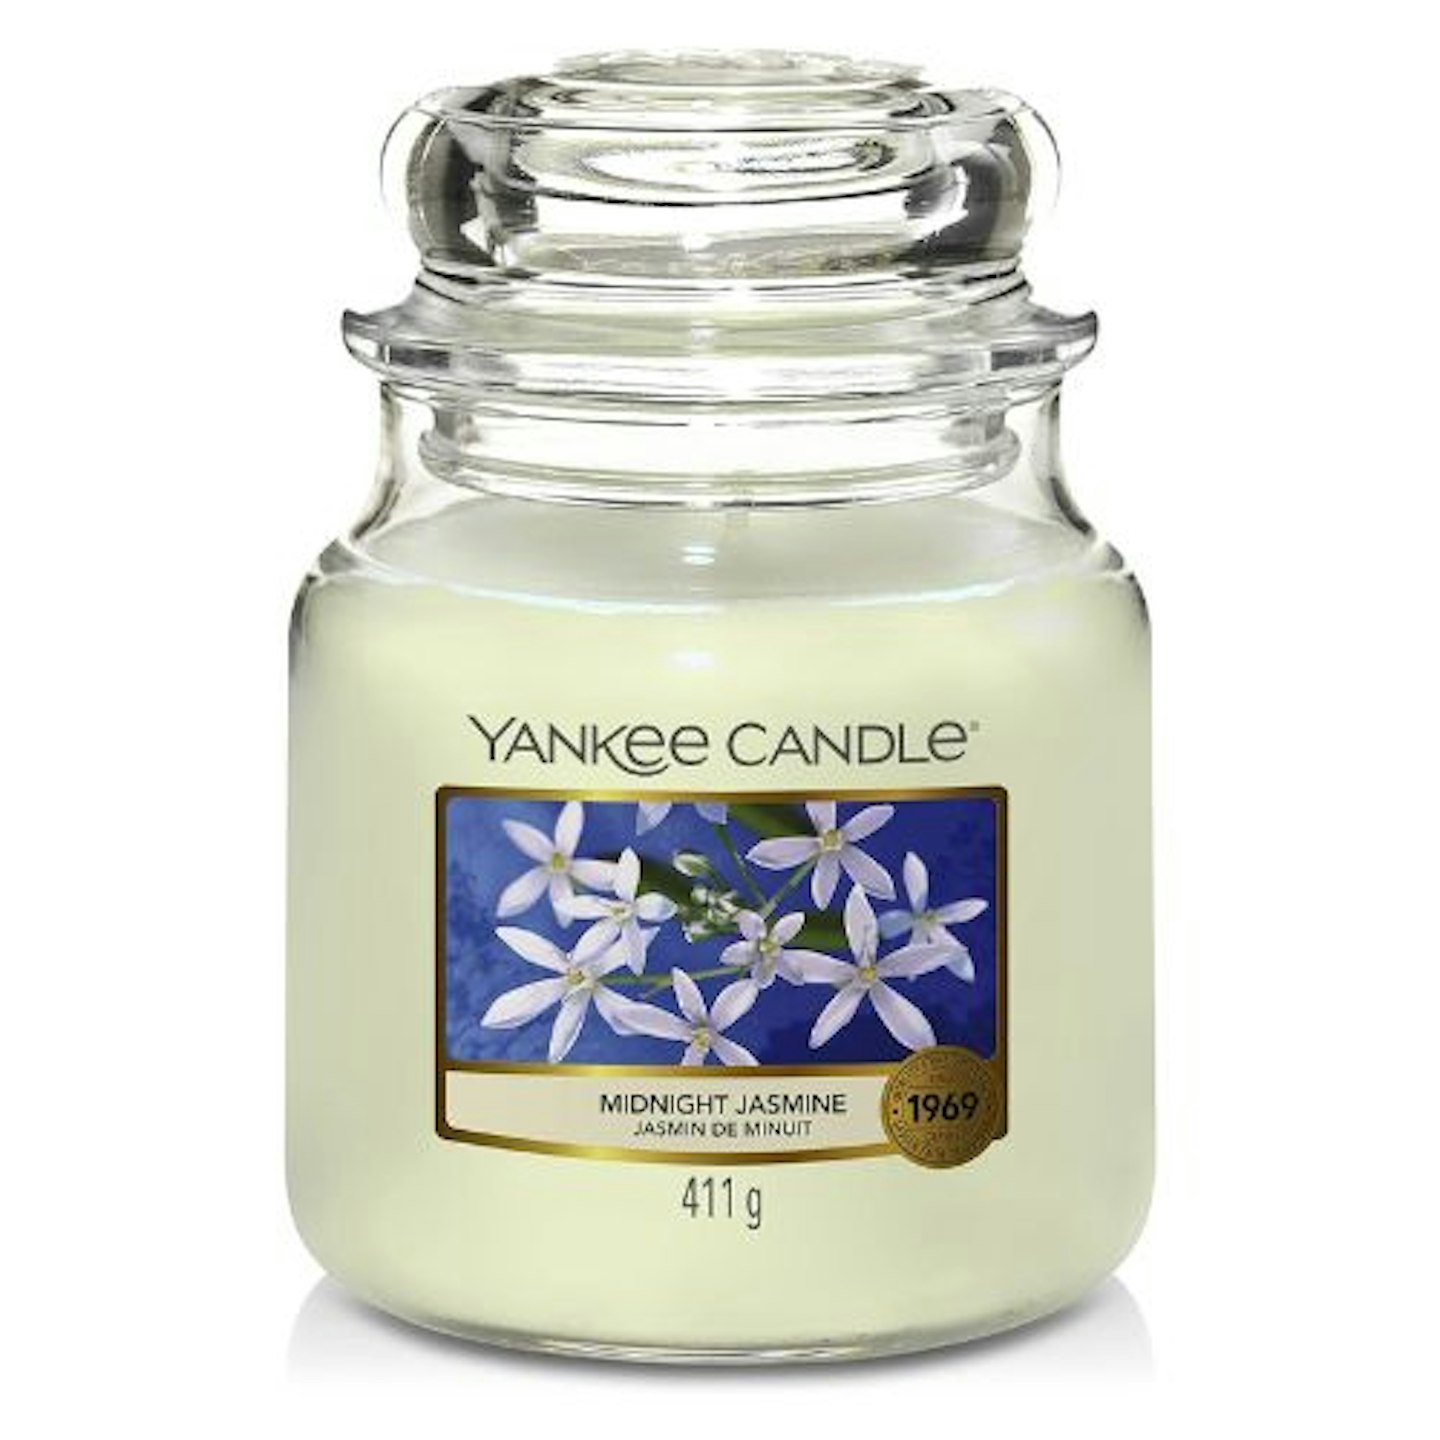 Yankee Candle Scented Candle | Midnight Jasmine Medium Jar Candle| Burn Time: Up to 75 Hours 